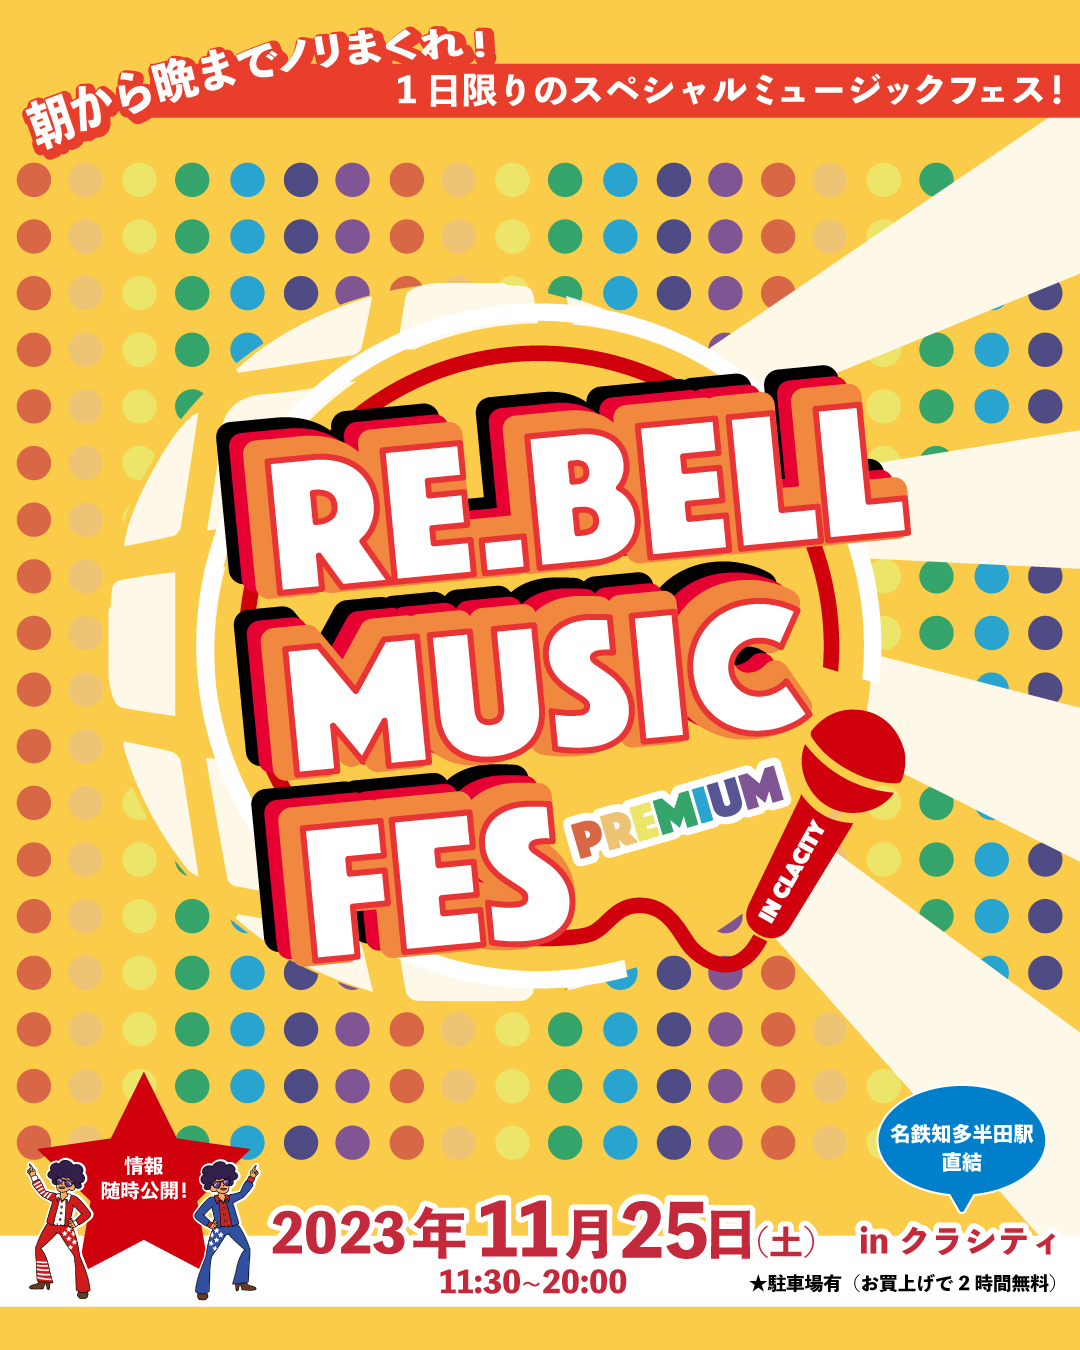 Re.Bell Music Fes PREMIUM　inクラシティ開催決定！